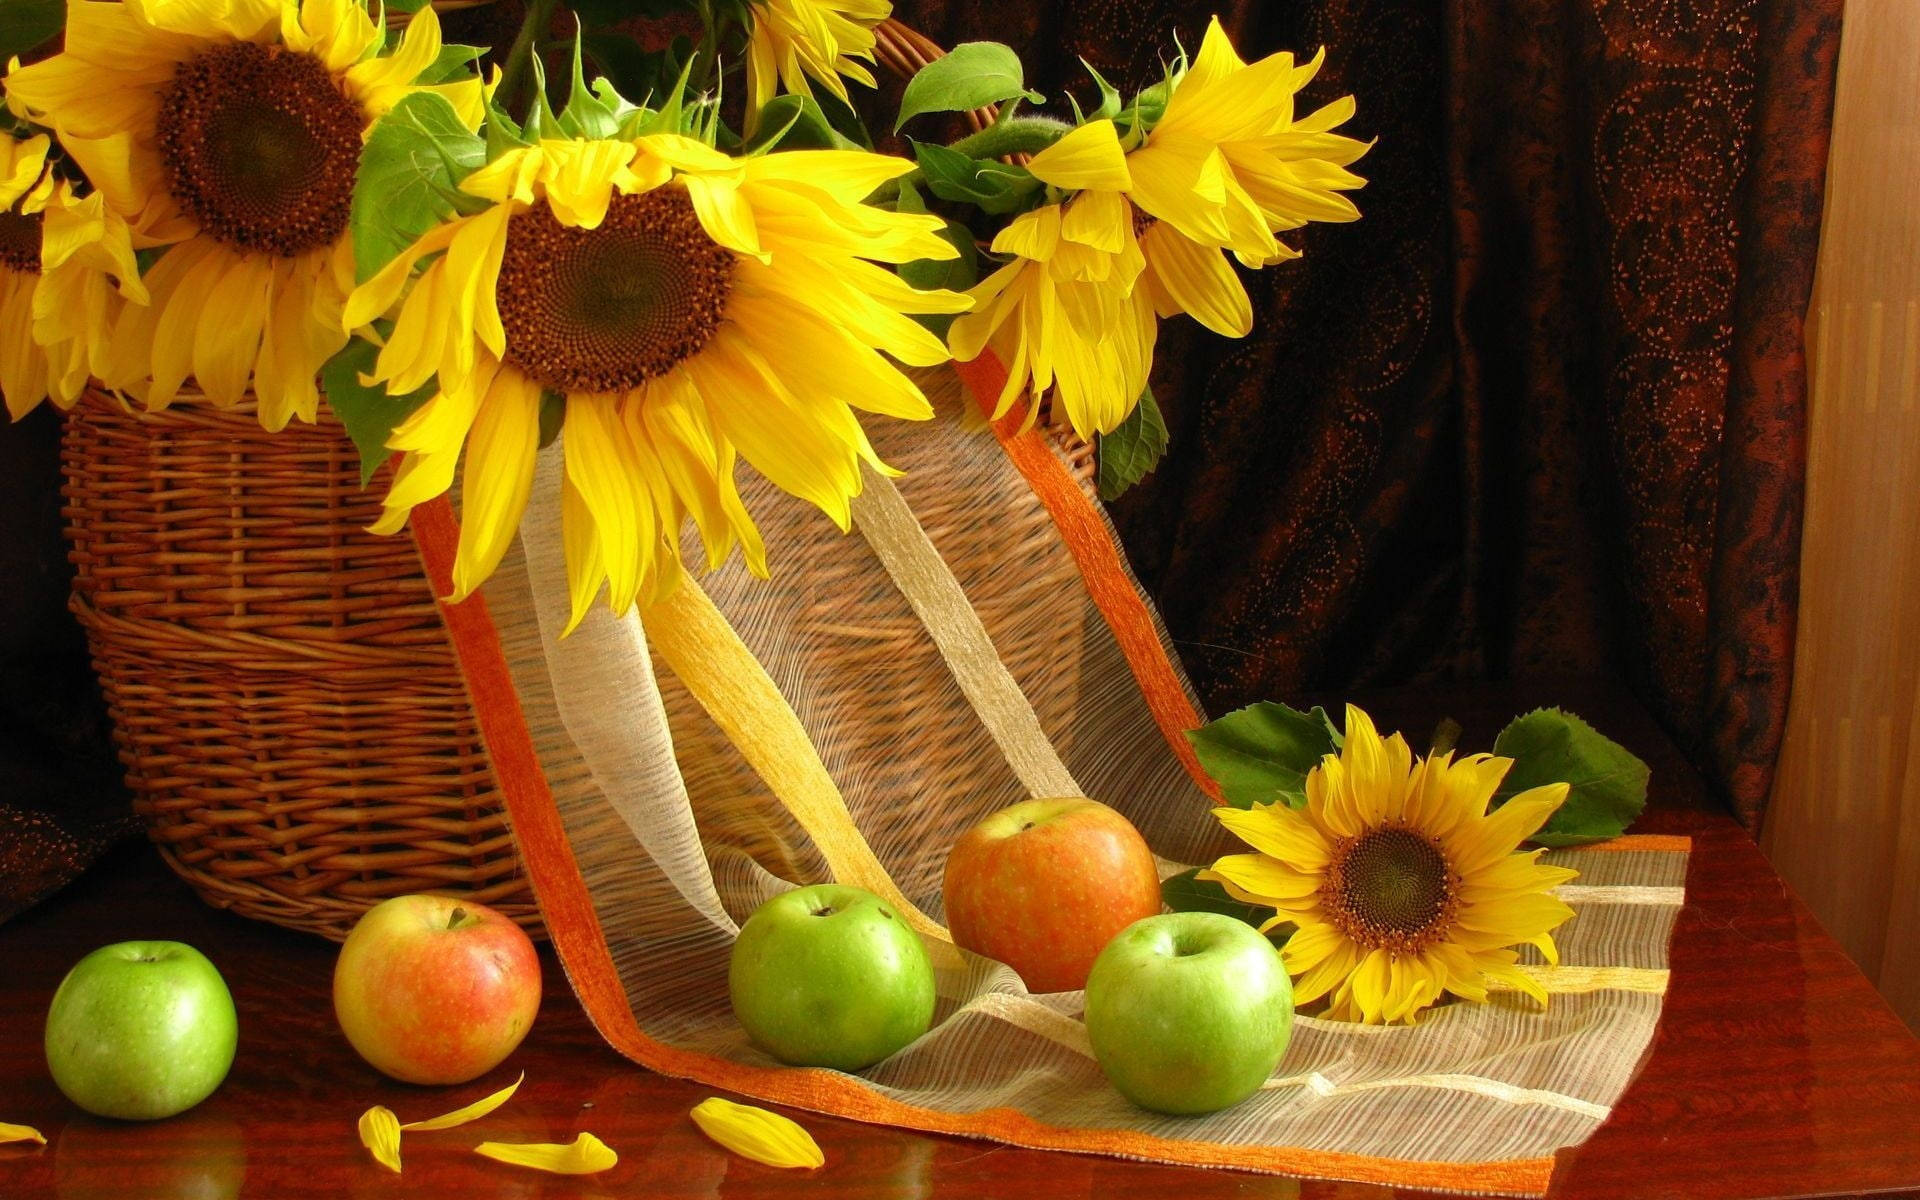 Static Sunflowers And Apples